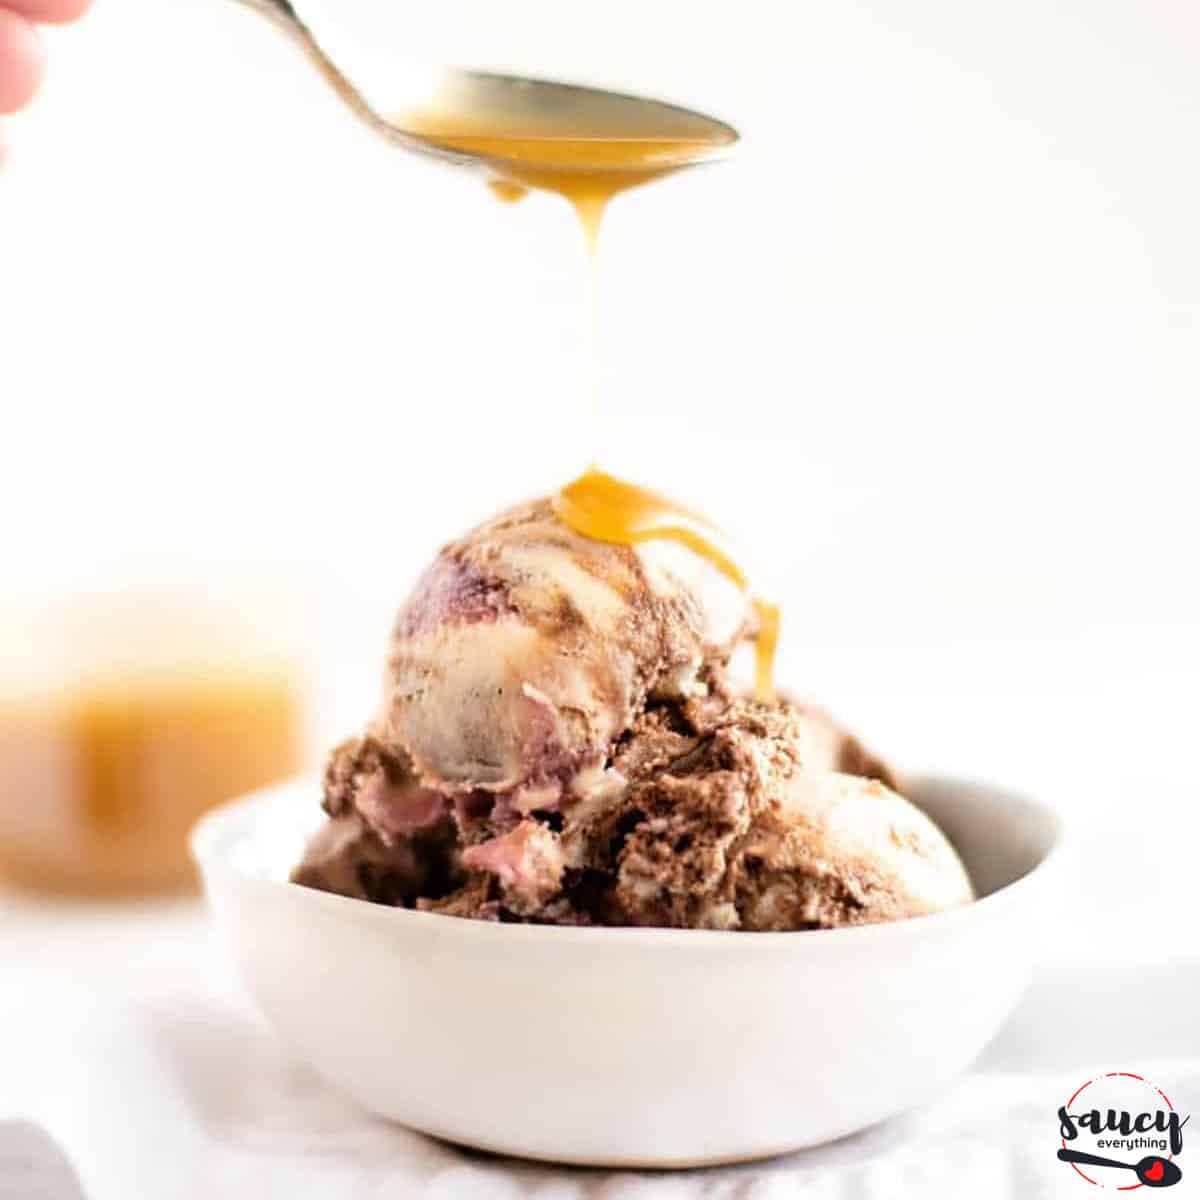 Drizzling butterscotch sauce on ice cream with a spoon